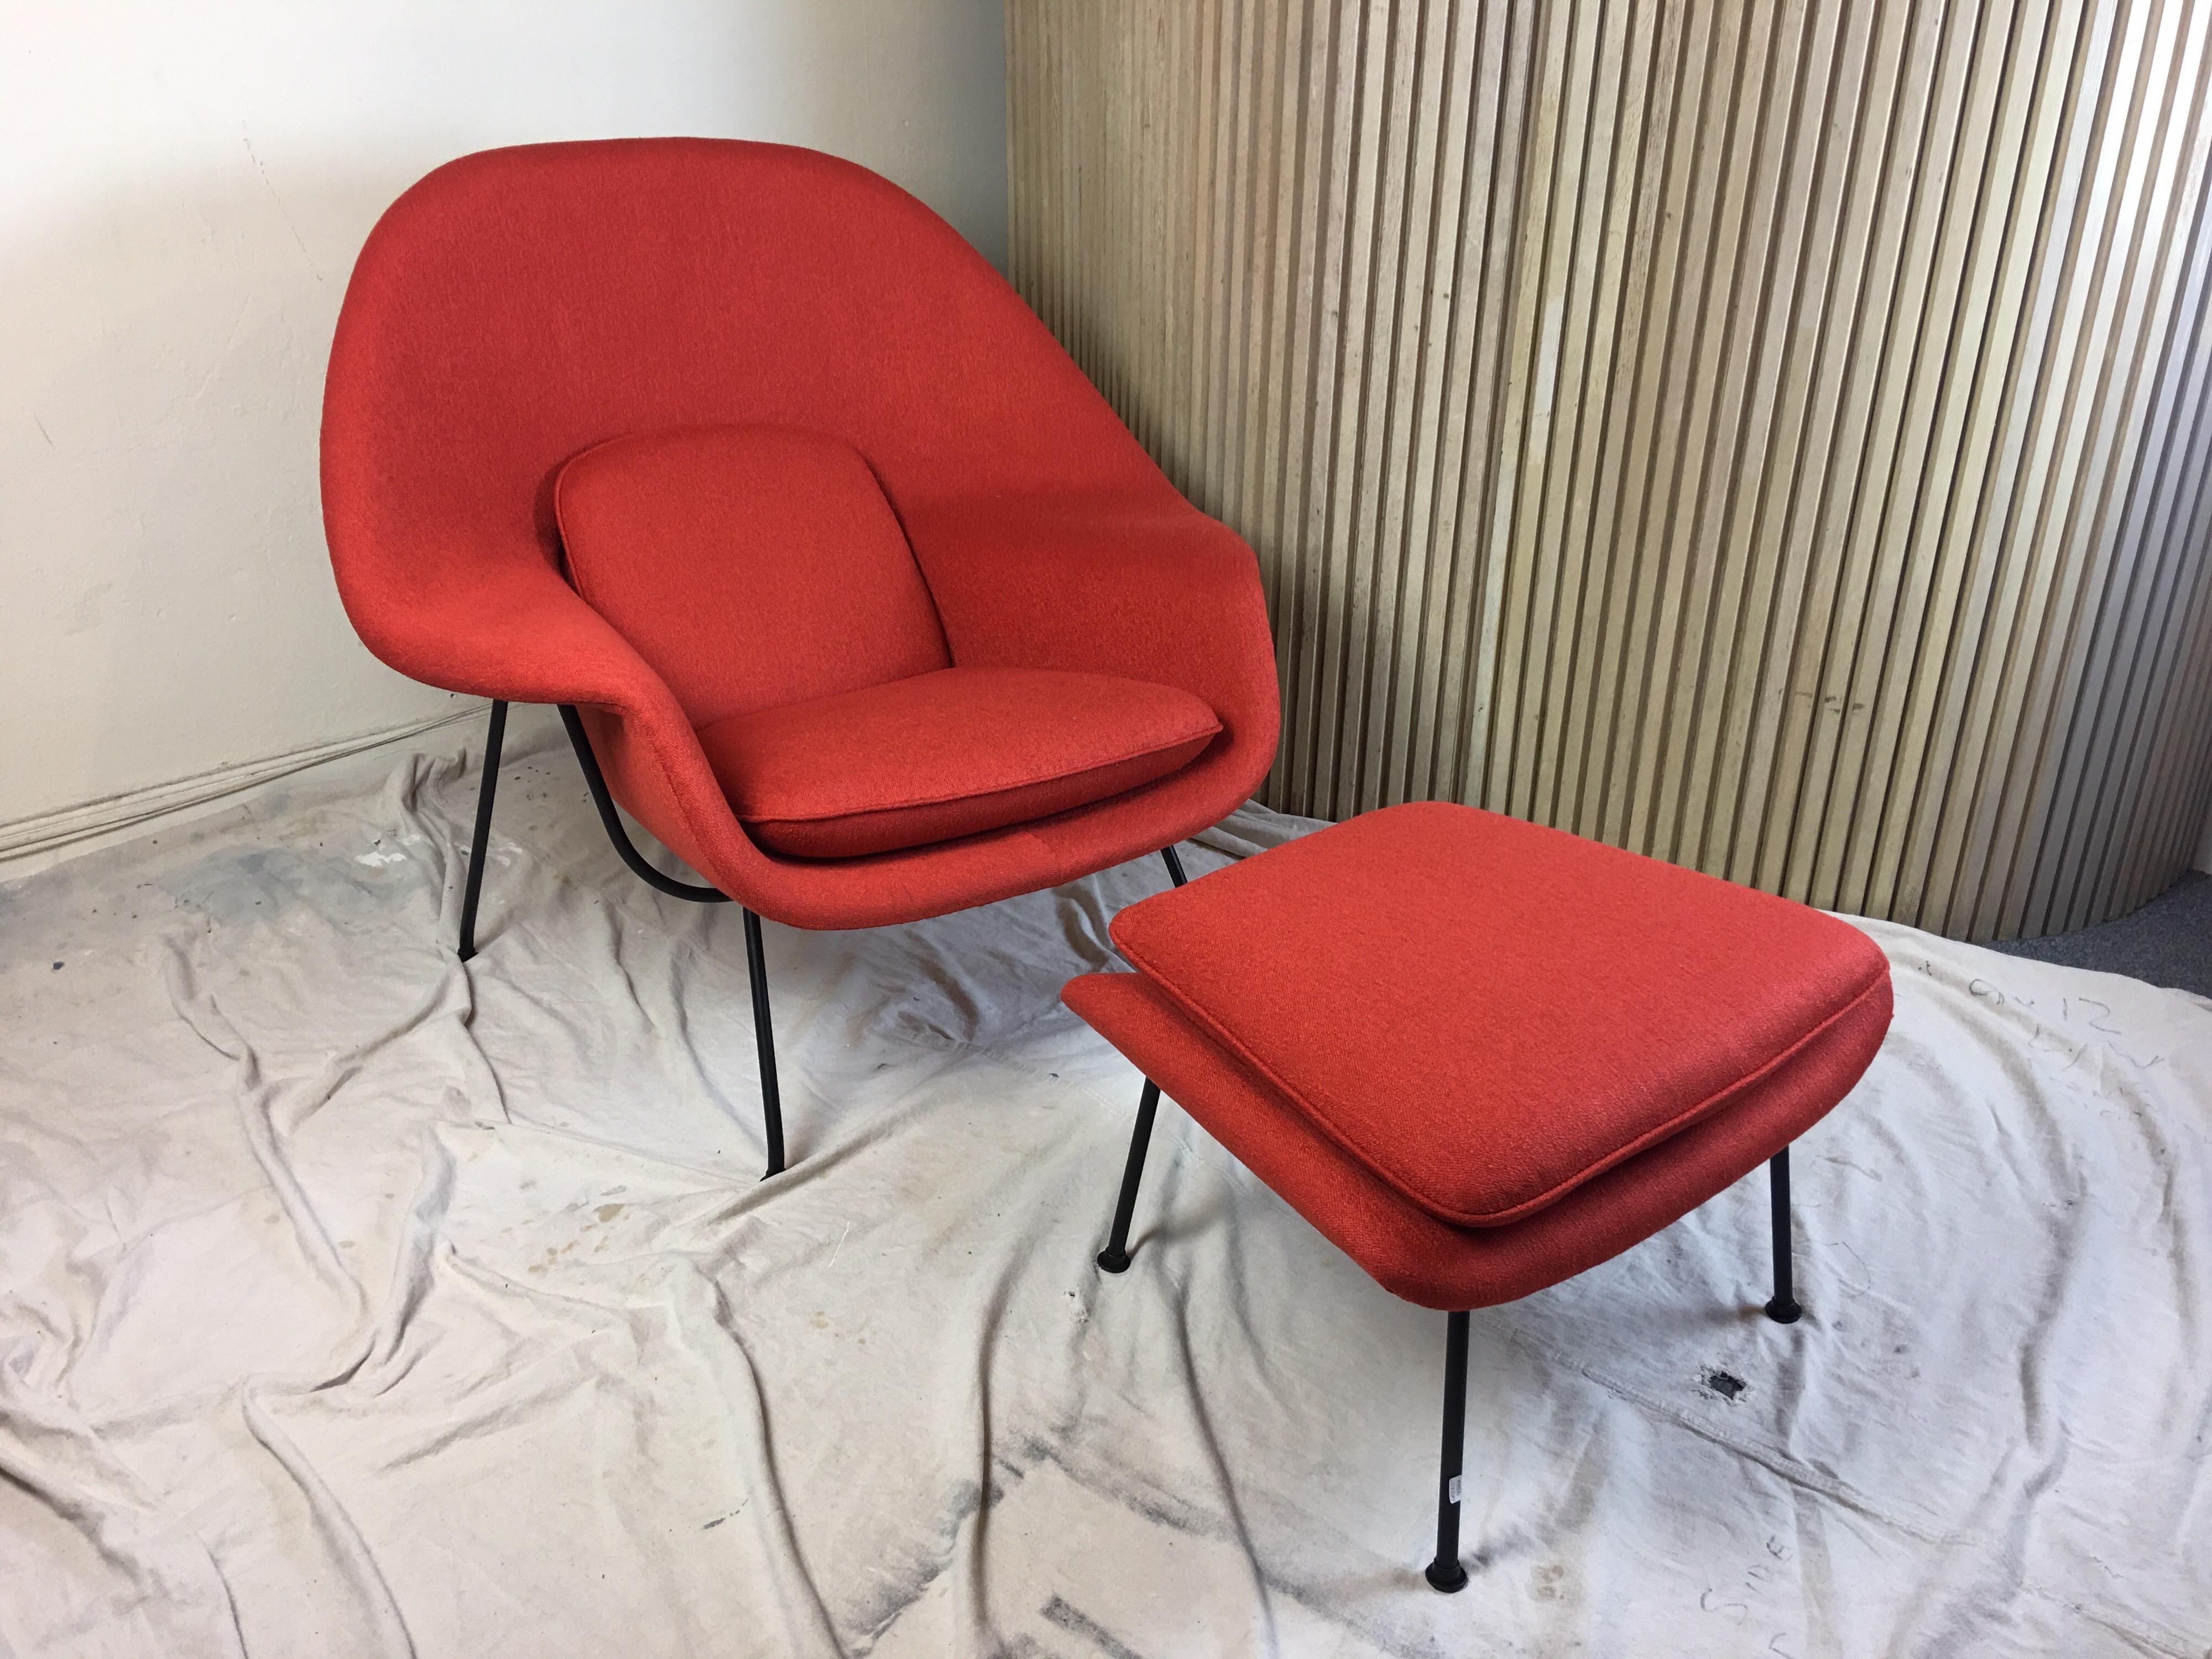 Nice early example from 1950s, cap style feet model. Newly upholstered in a red nubby weave fabric. Fiberglass body with metal frame work and legs. Said to comfort comparable to a Mother's Womb. In all honesty I think it is the most comfortable